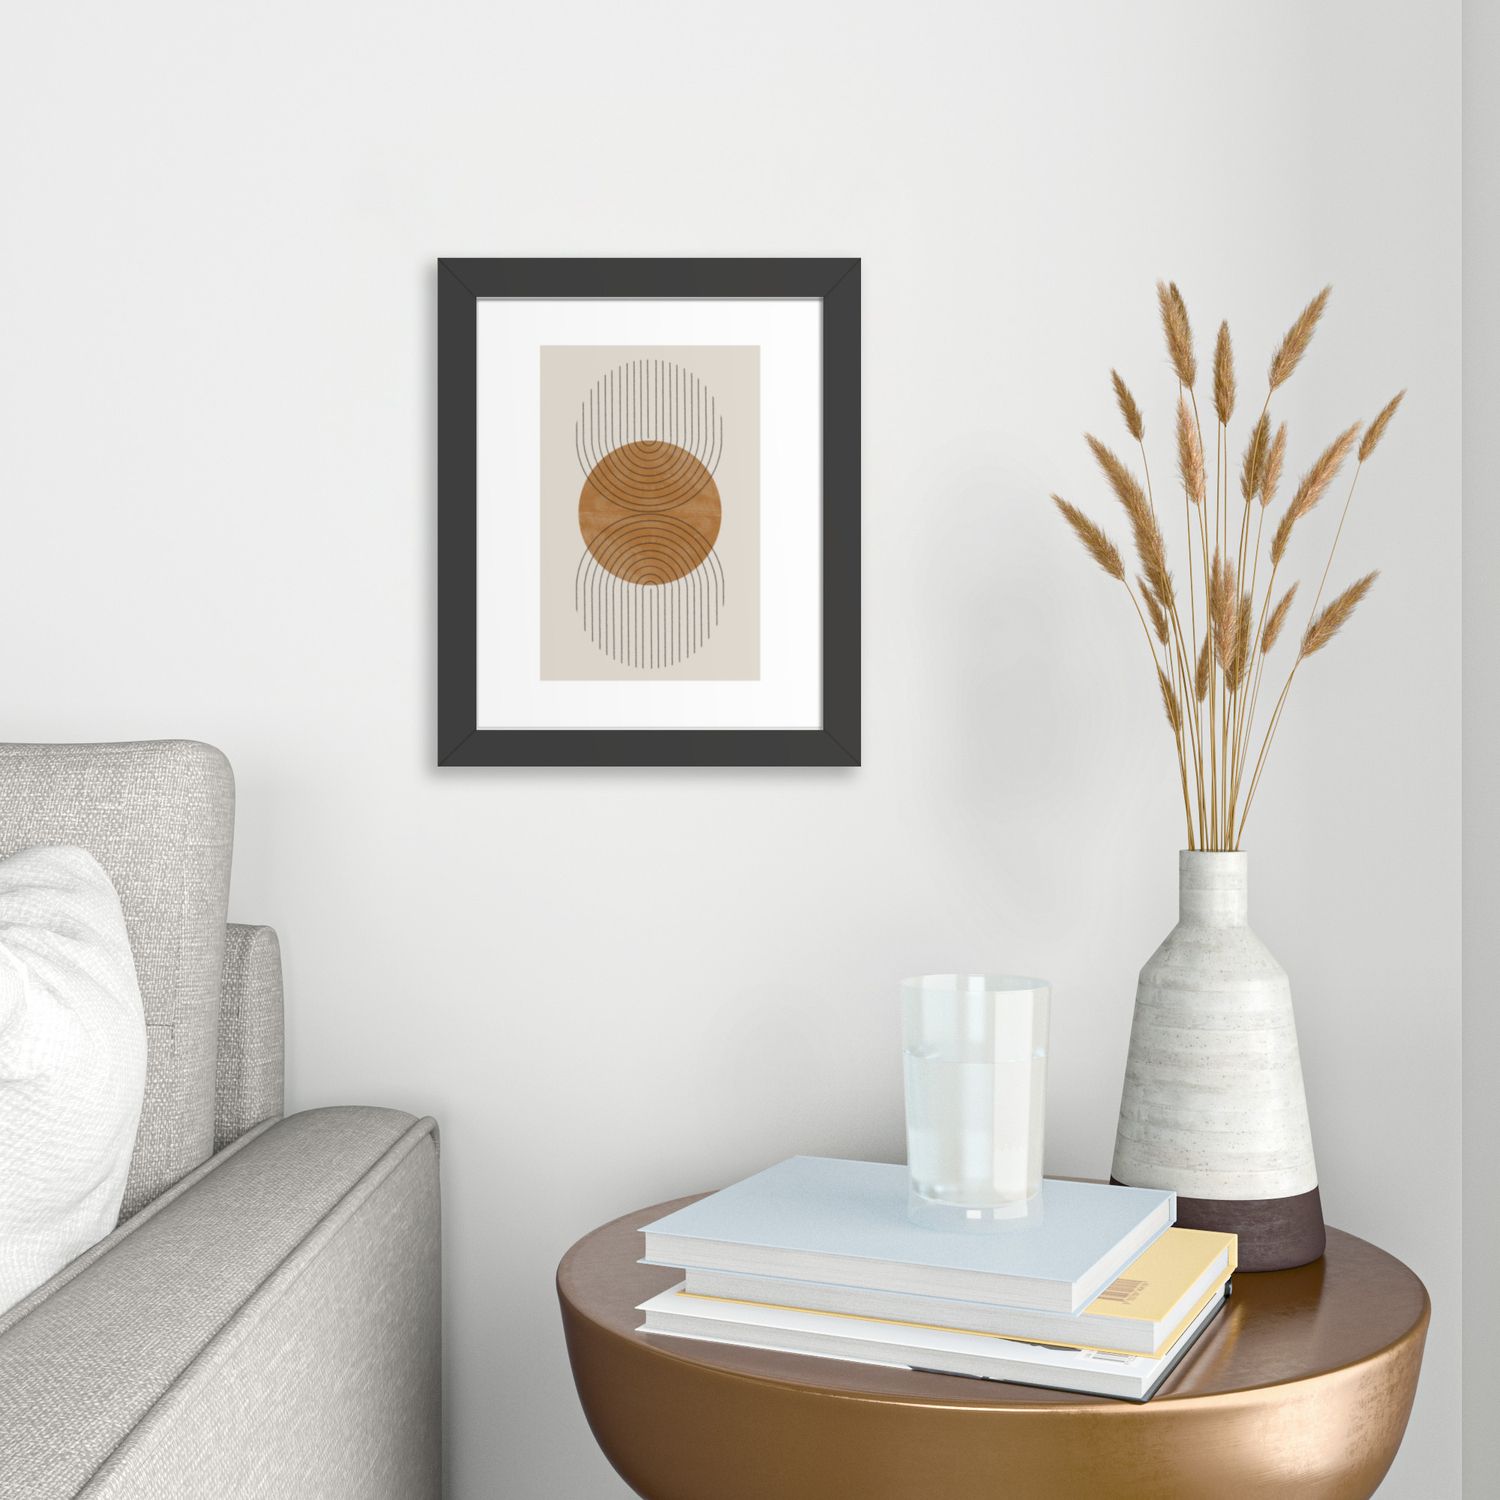 Perfect Touch Framed Art Printthe Miuus Studio | Society6 With Perfect Touch Wall Art (View 2 of 15)